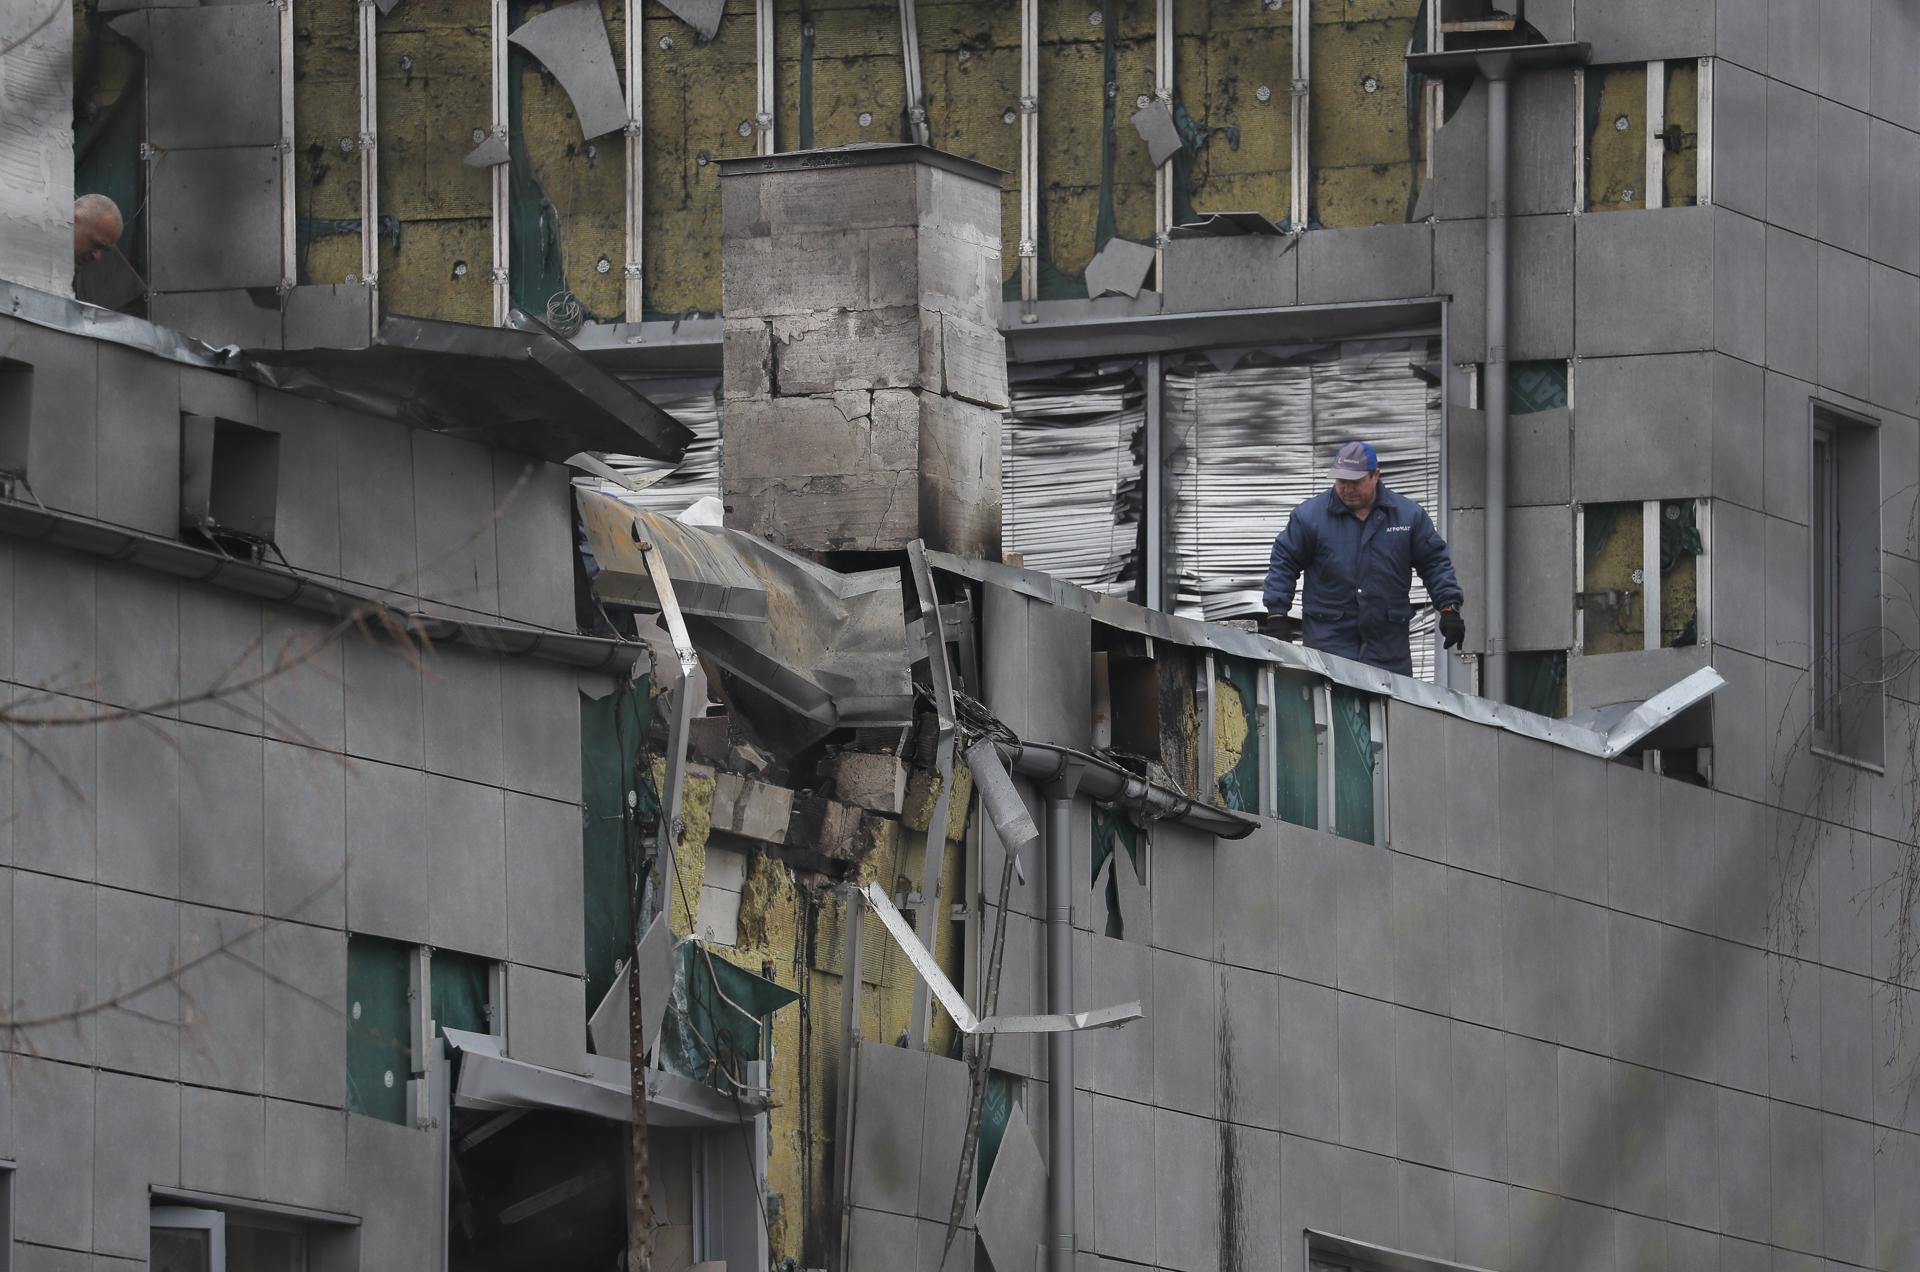 Workers clean debris at the site of a downed attack drone, in a residential area of Kyiv, Ukraine, 28 March 2023. EFE-EPA FILE/SERGEY DOLZHENKO